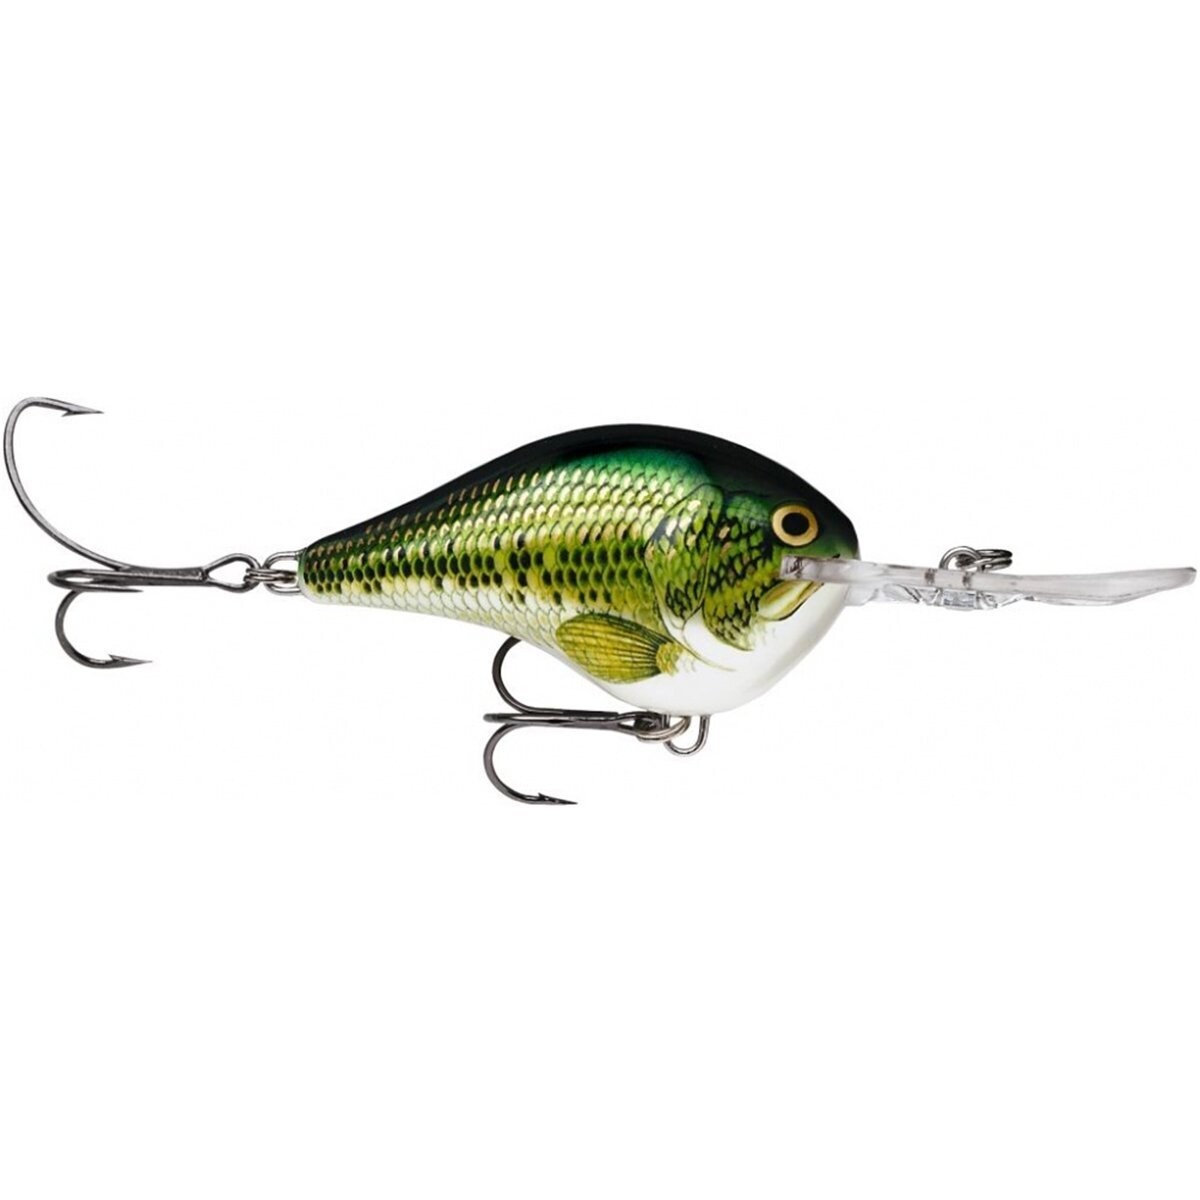 Rapala Dives-To 04 Crankbait 2", 5/16 oz, Baby Bass, Floating